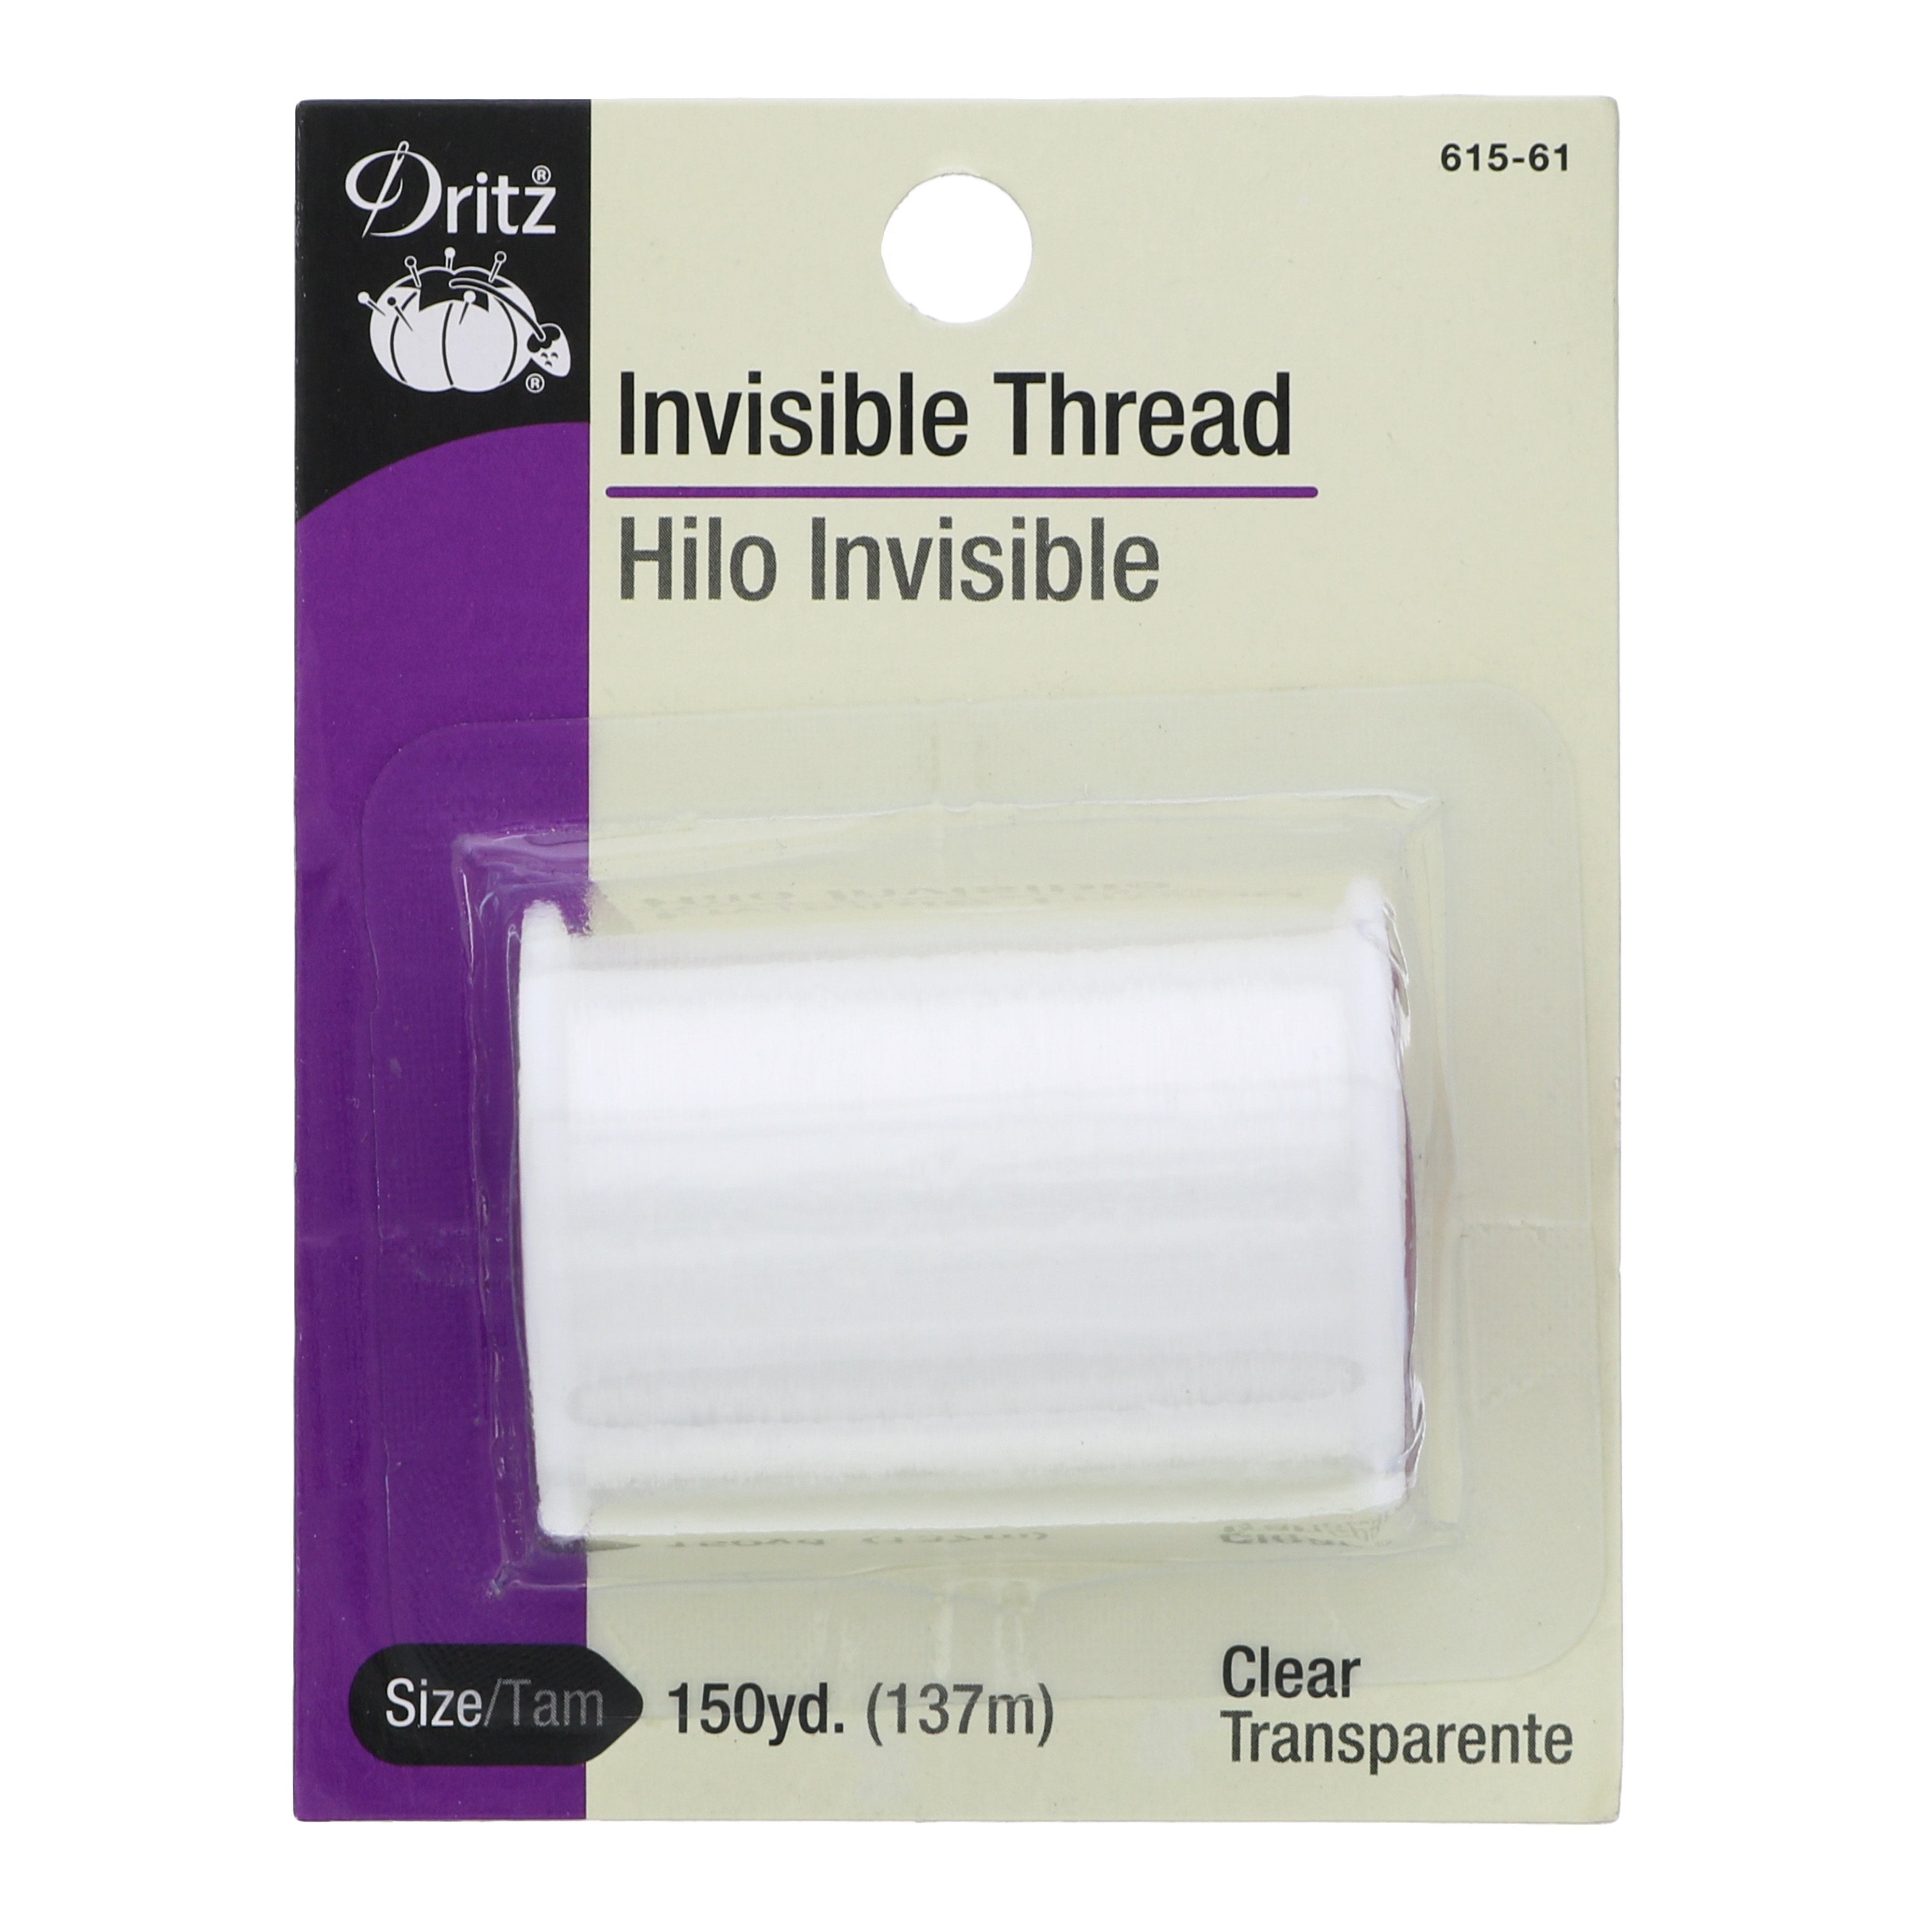 Best Invisible Thread for Sewing, Beading, and More –